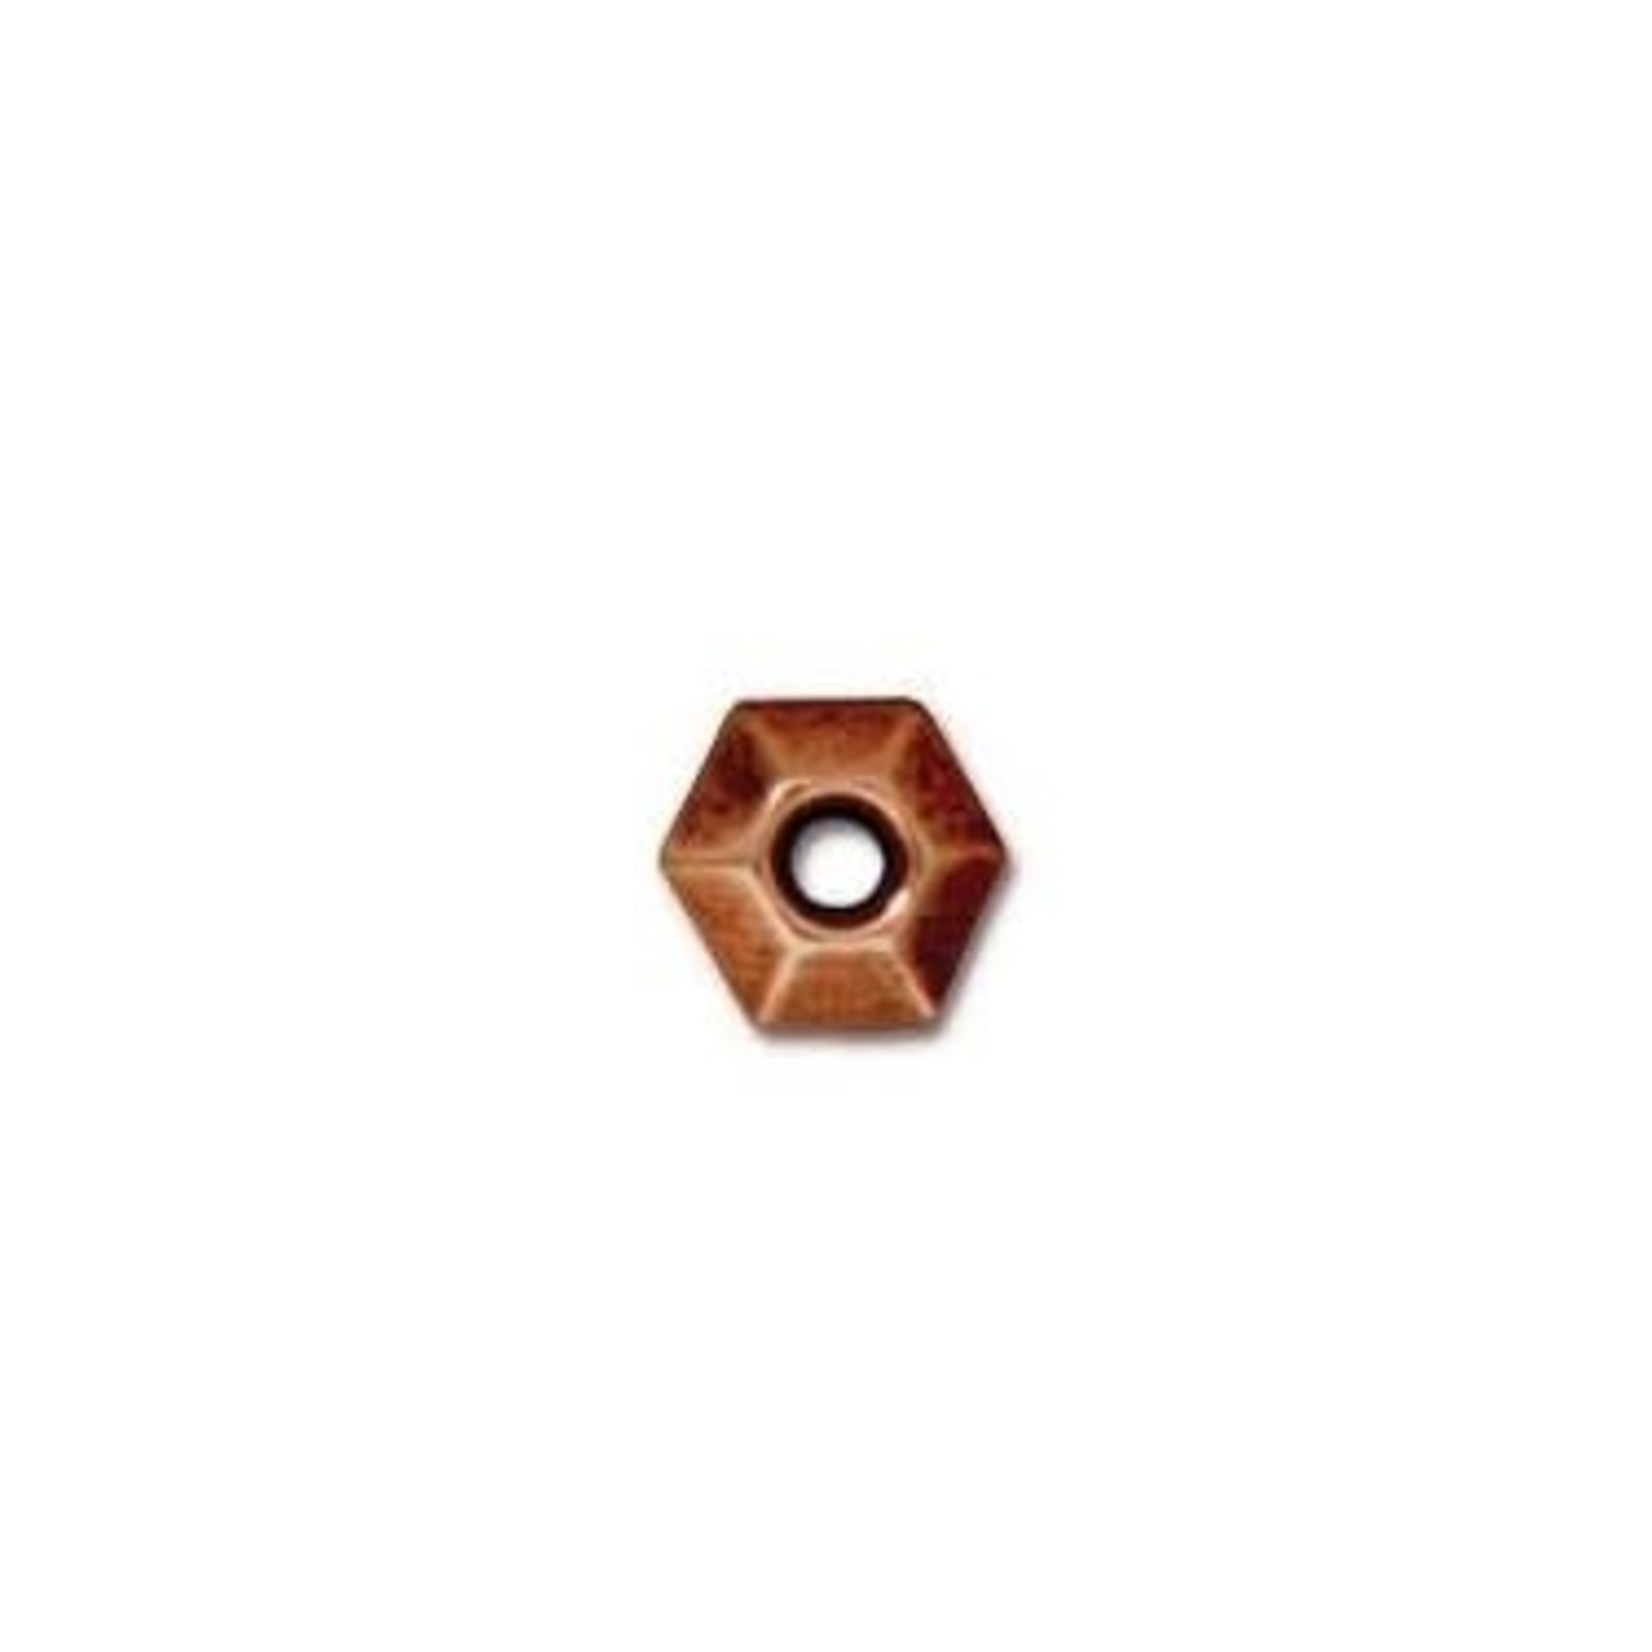 Faceted 5mm Spacer Bead Antique Copper Plated